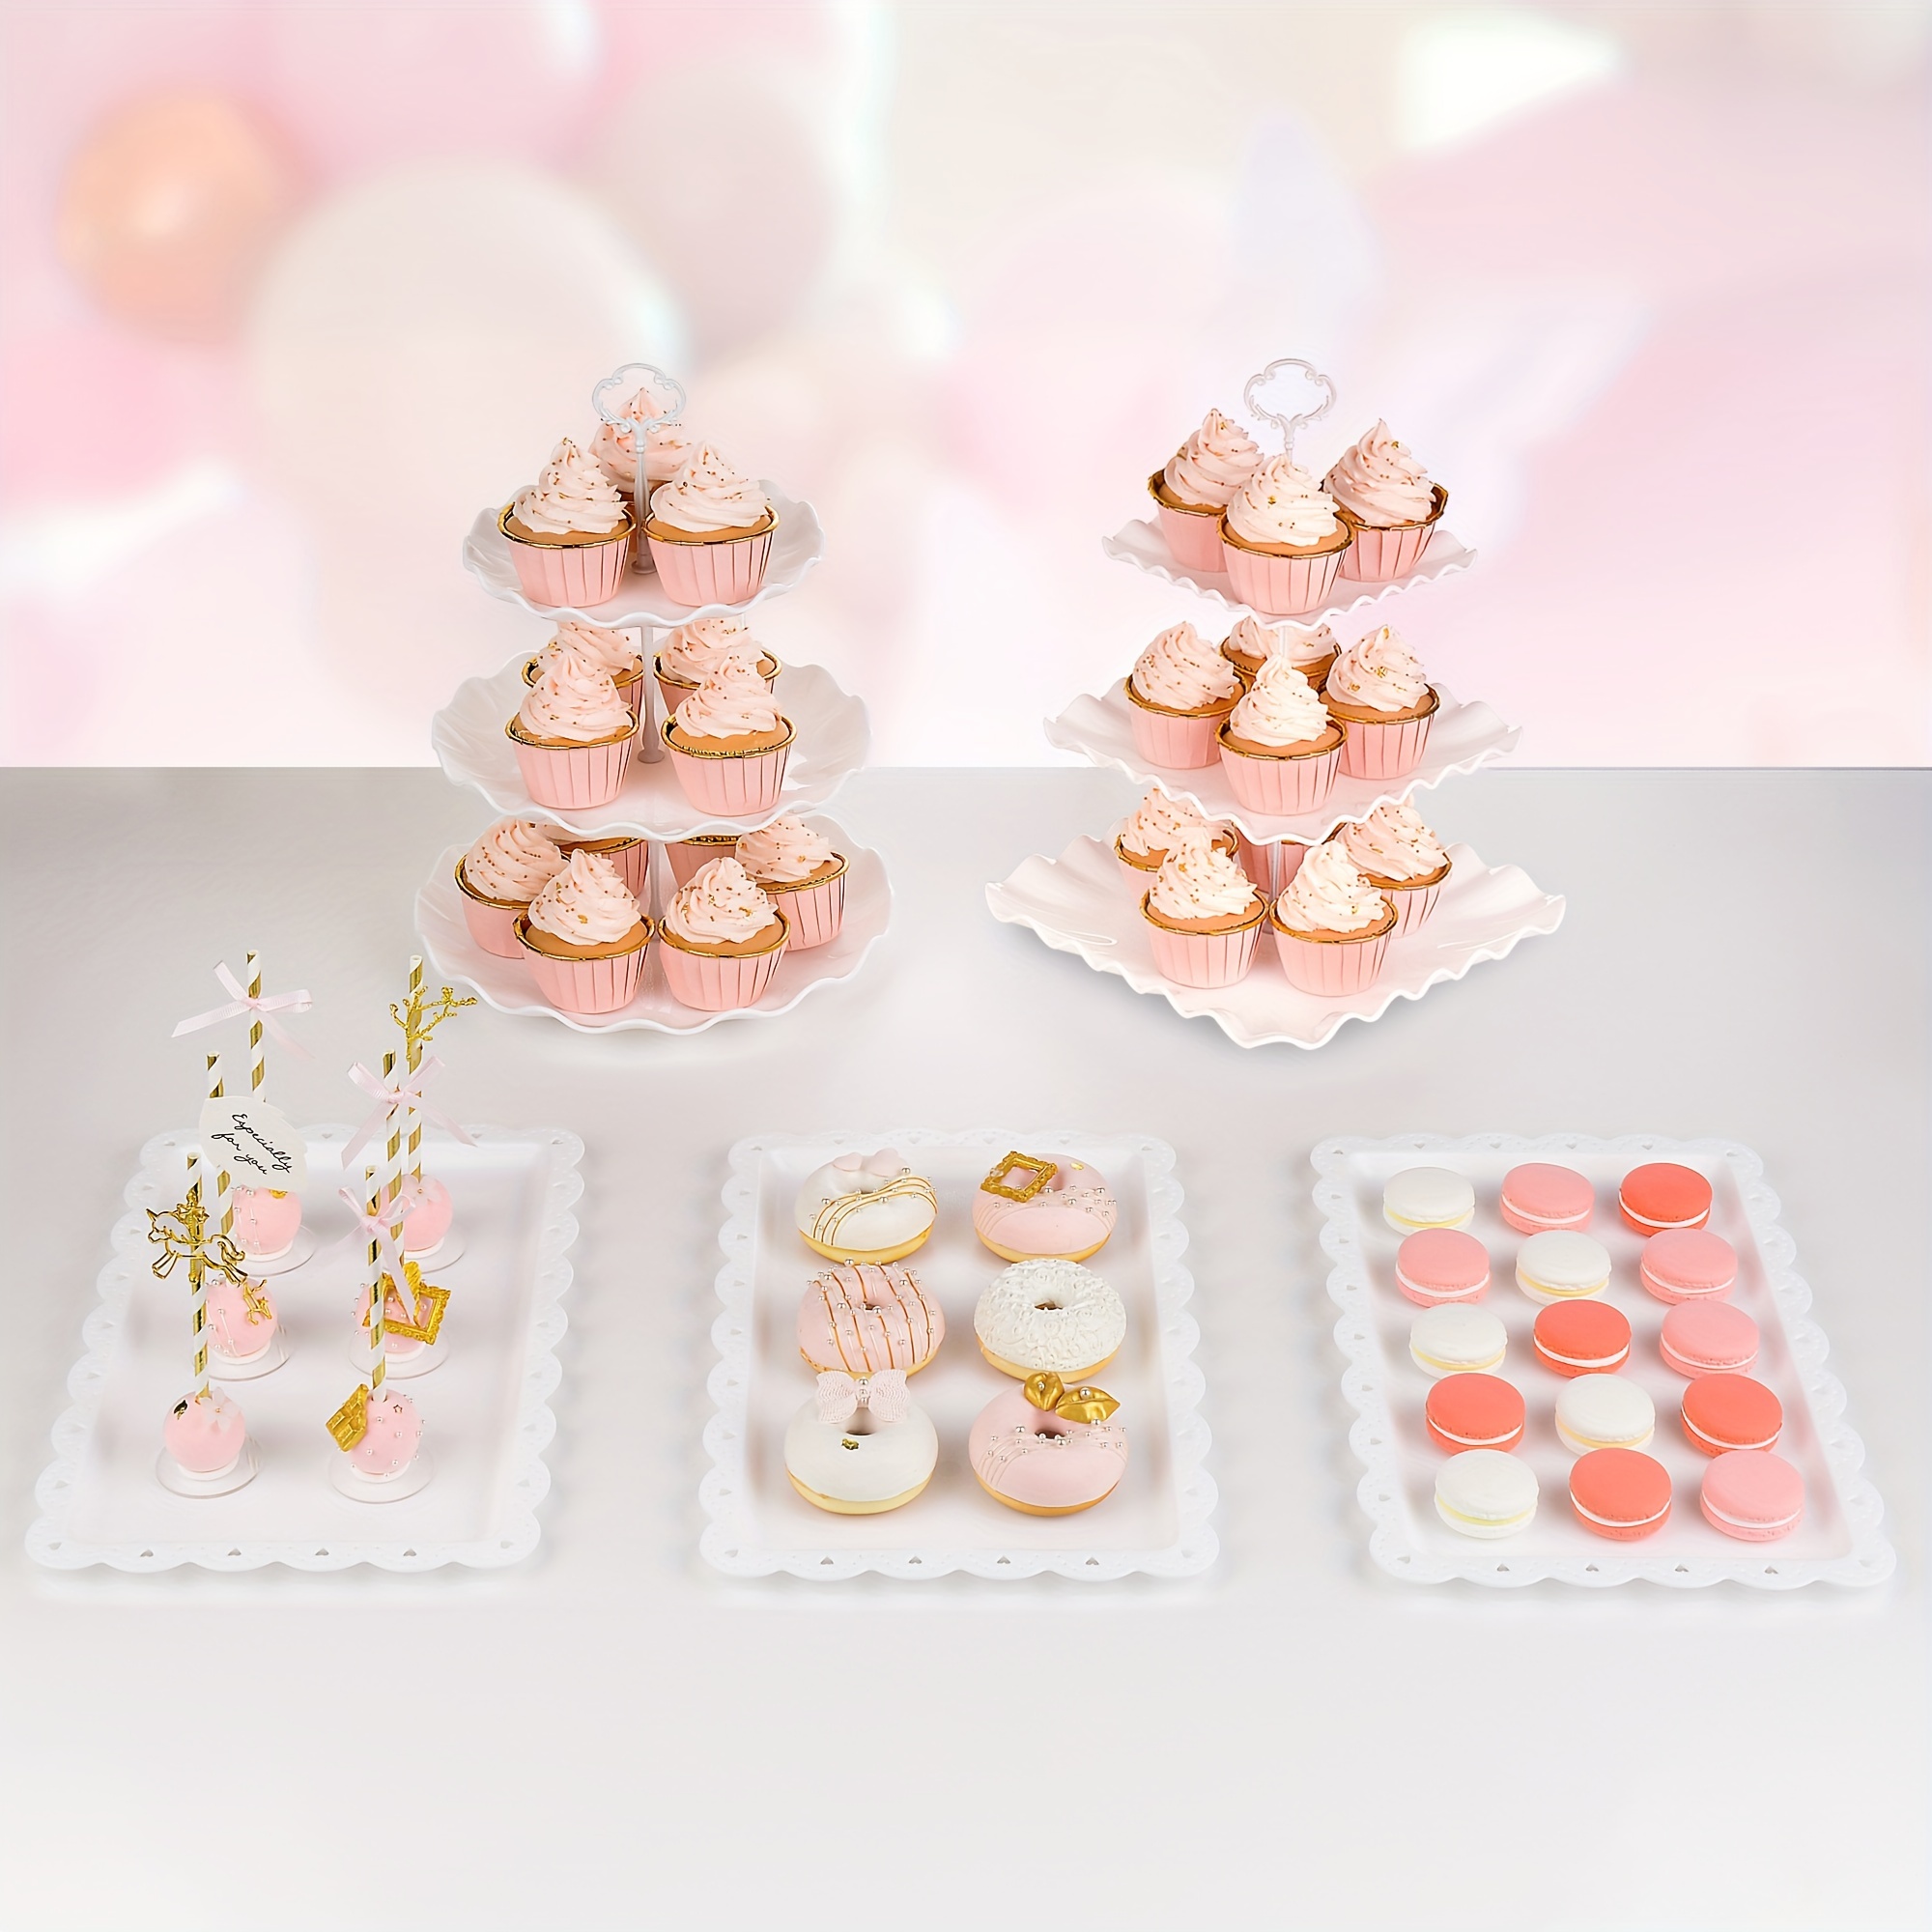 

5pcs, Cupcake Dessert Stand Set With 3-tier Square Cupcake Stands +3-tier Round Cupcake Stands+ 3x Appetizer Trays Perfect For Wedding Birthday Baby Shower Tea Graduation Party